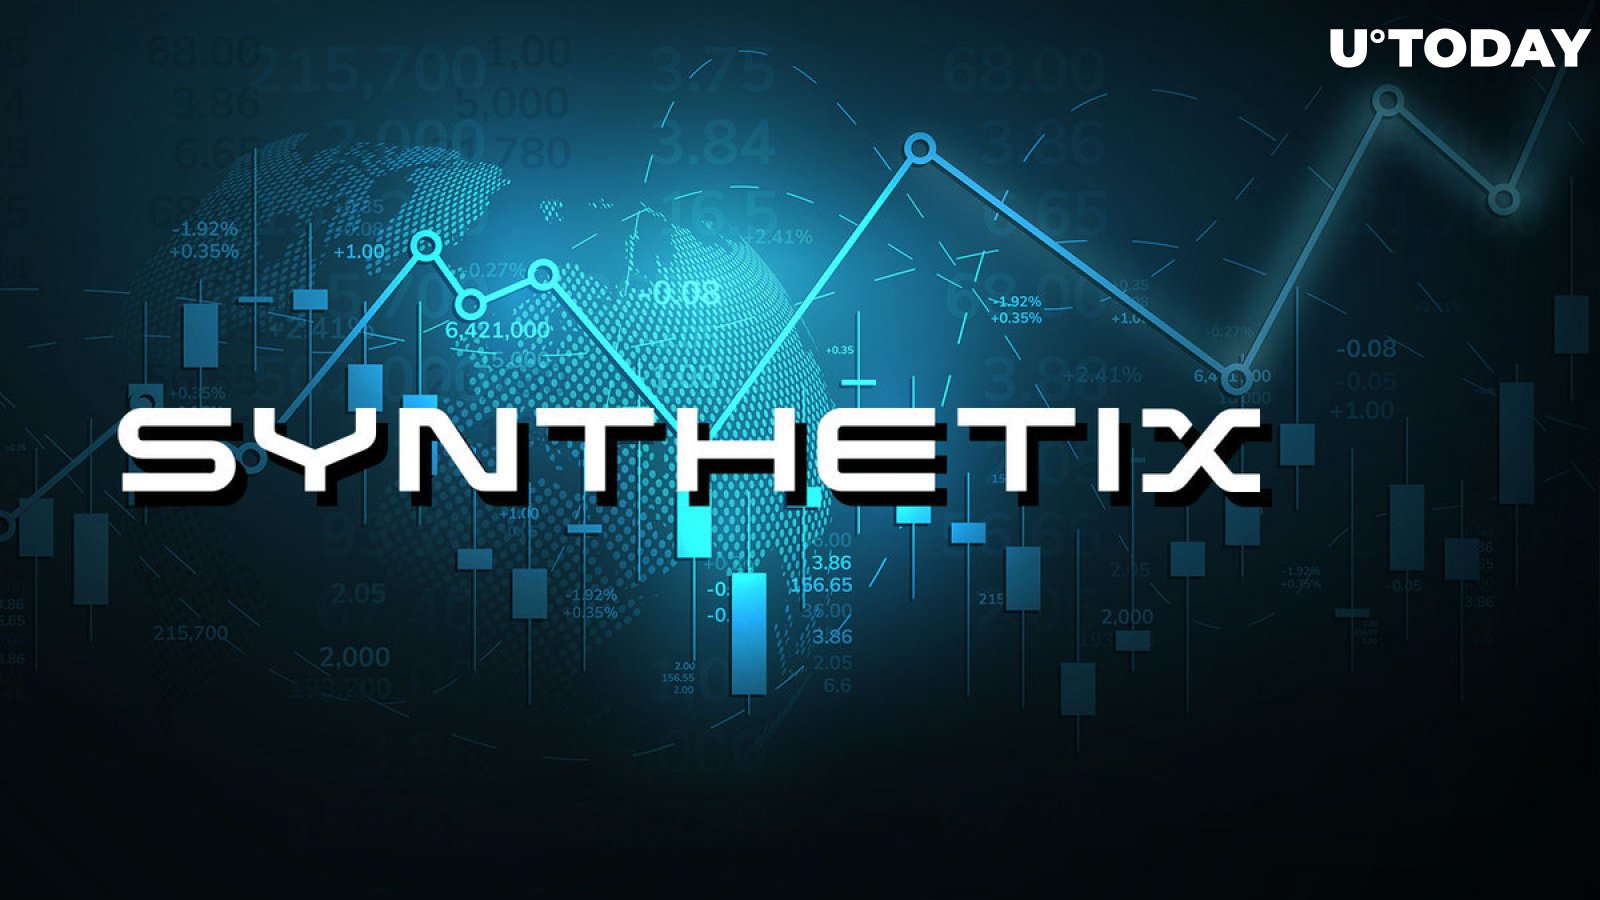 Synthetix (SNX) up 30% After Hitting This Important Growth Metric